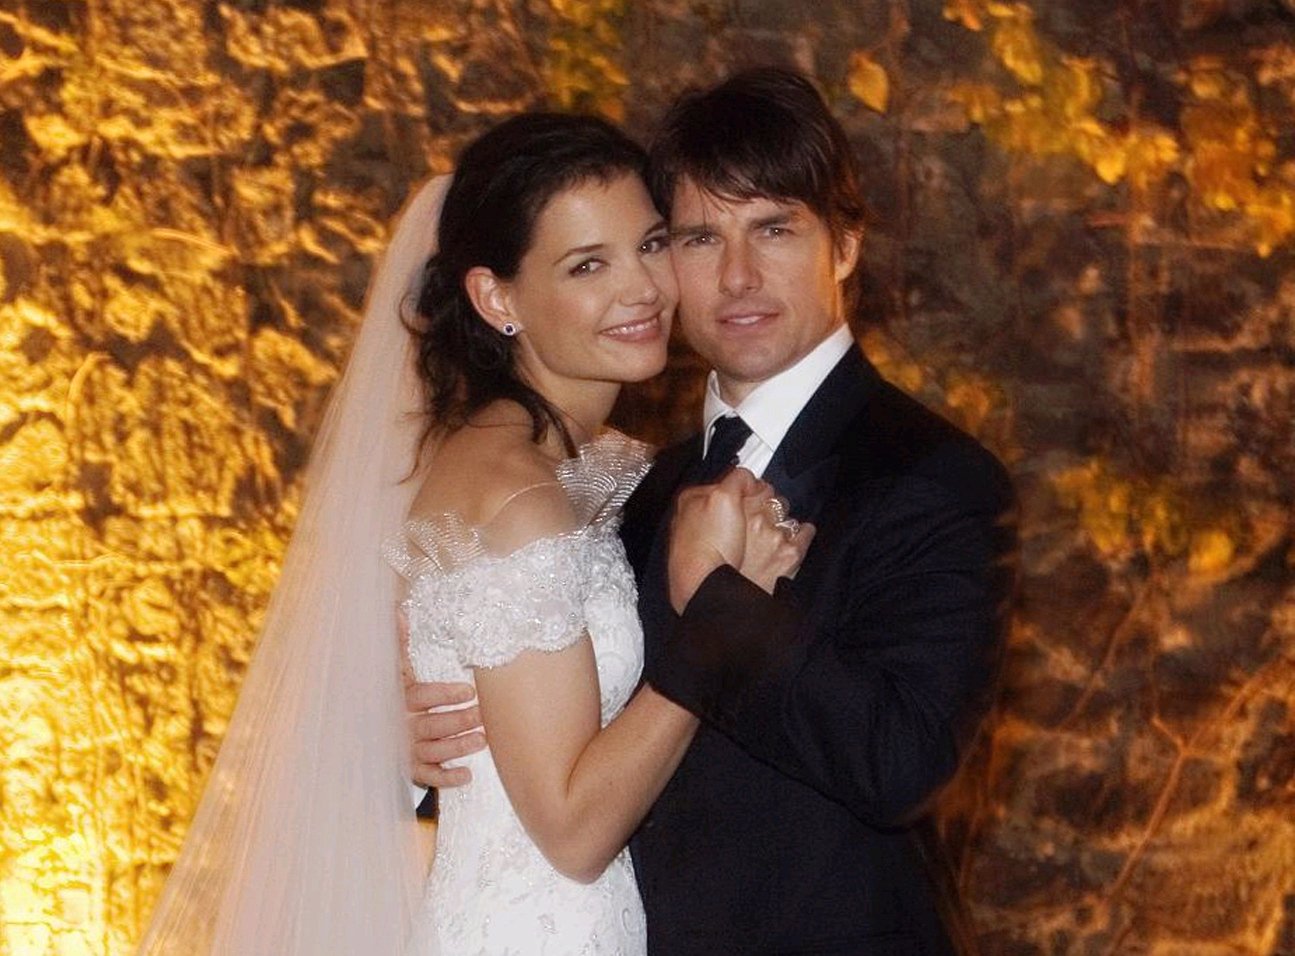 Tom Cruise and Katie Holmes on their wedding day in 2006.